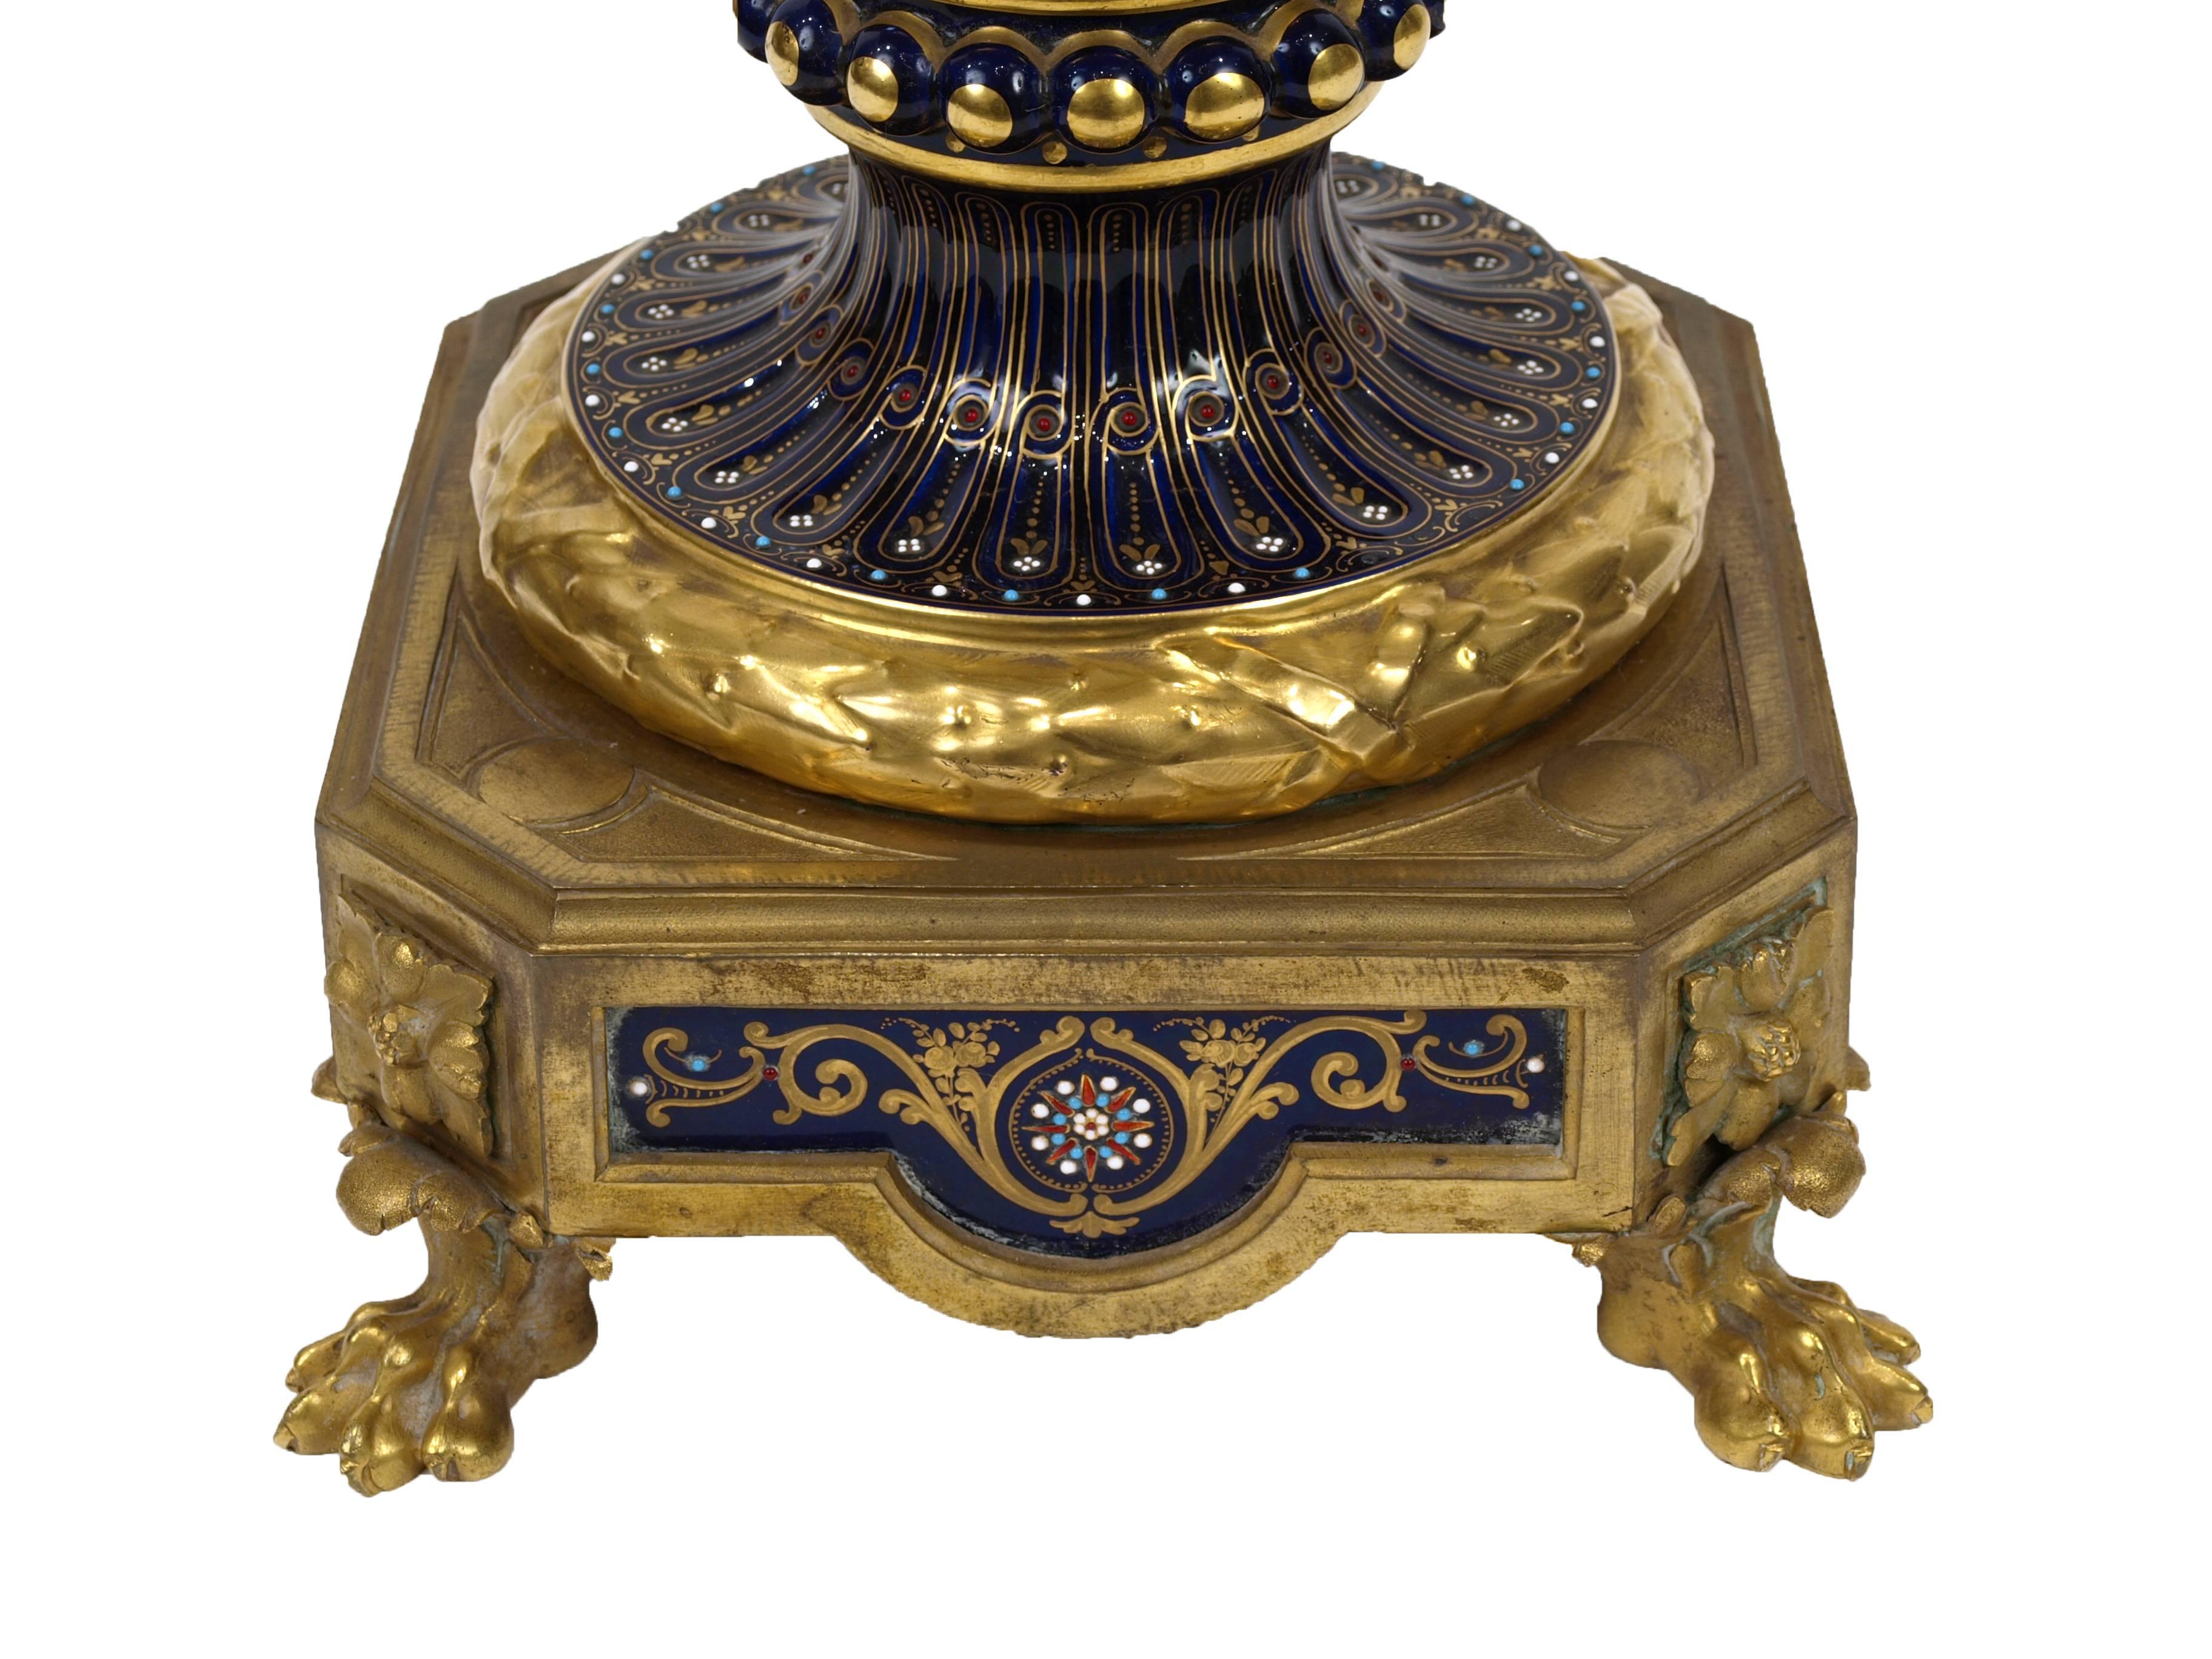 French Very Fine Ormolu-Mounted Sèvres Style Porcelain Vase For Sale